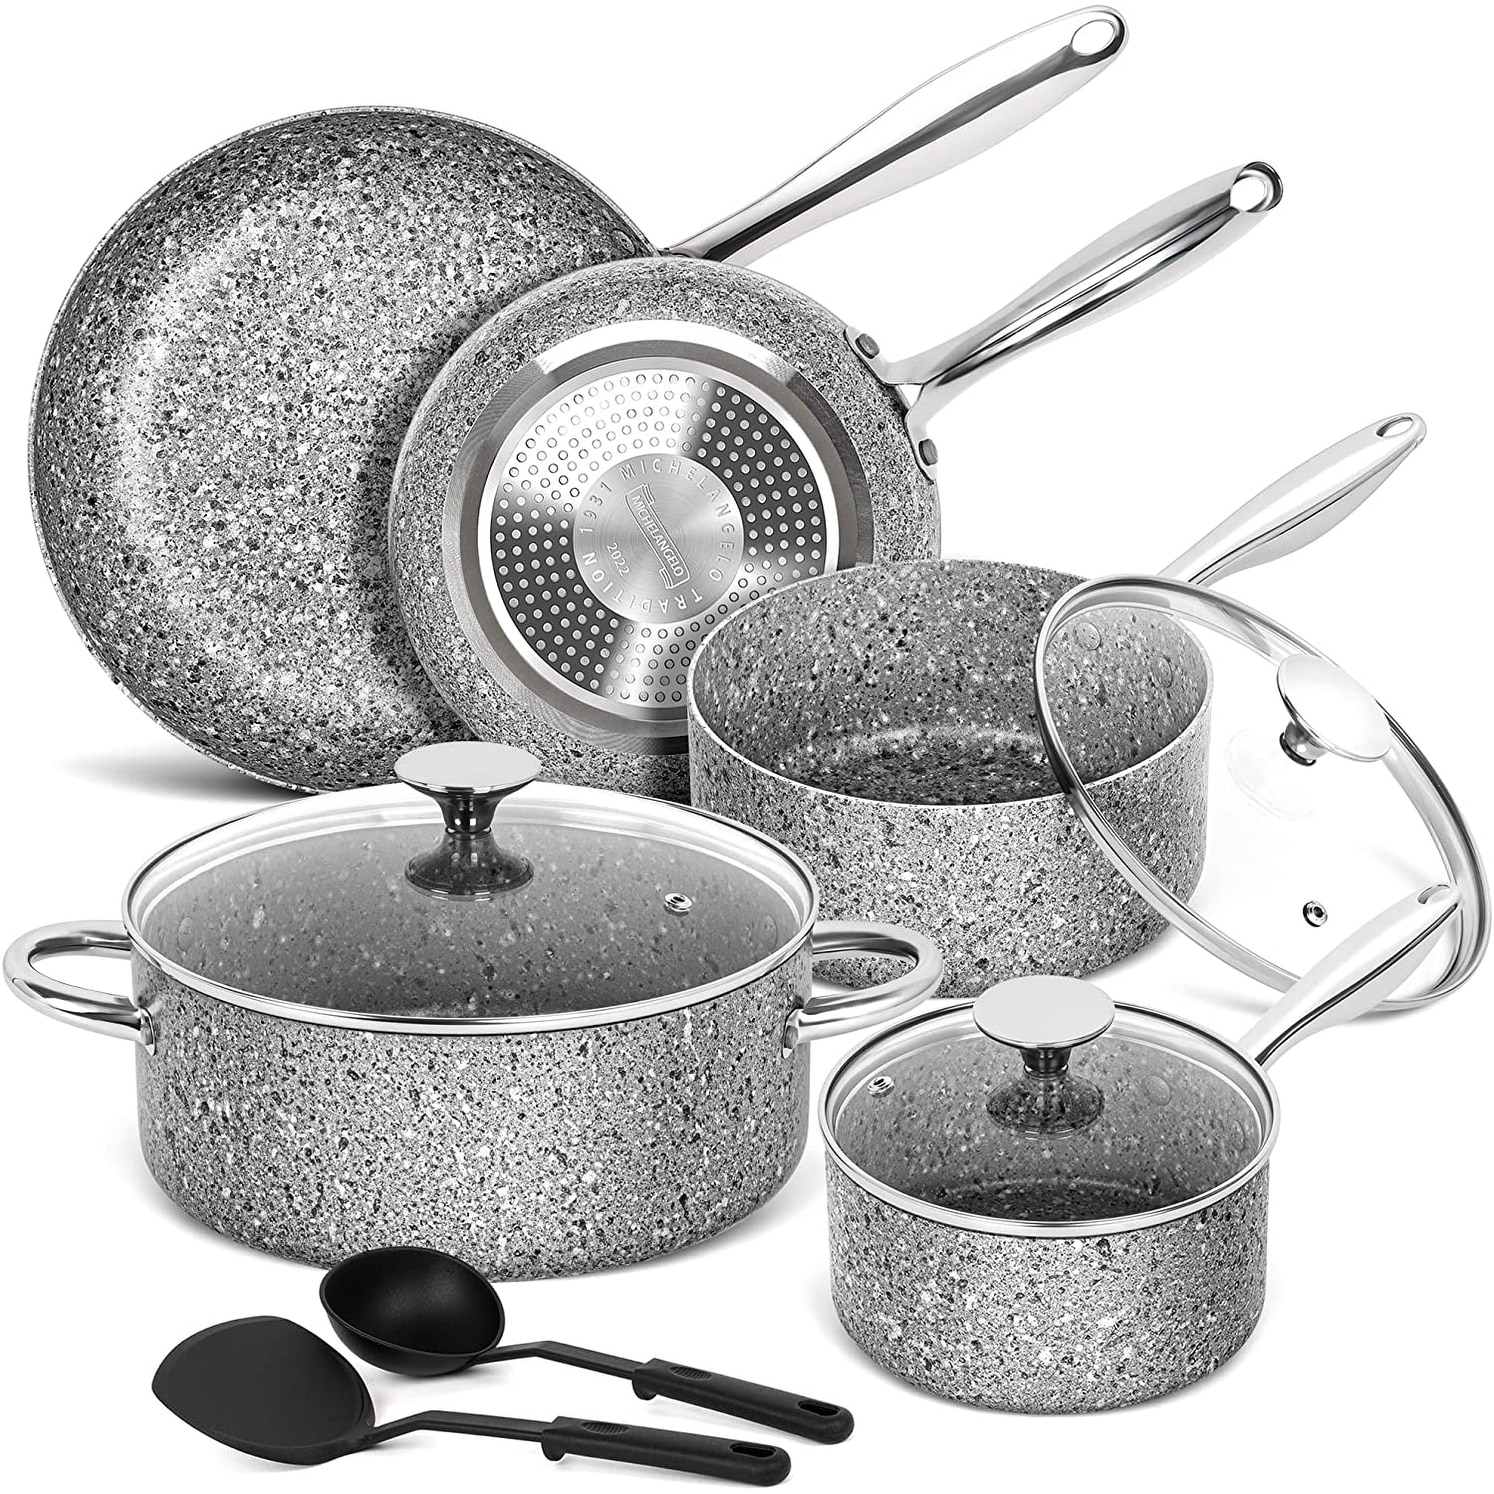 https://ak1.ostkcdn.com/images/products/is/images/direct/118b95e010250a8fd189ee06c62e2e88df1b4ec5/Pots-and-Pans-Set-22-Piece%2C-Nonstick-Kitchen-Cookware-Sets-with-Stone-Derived-Coating.jpg